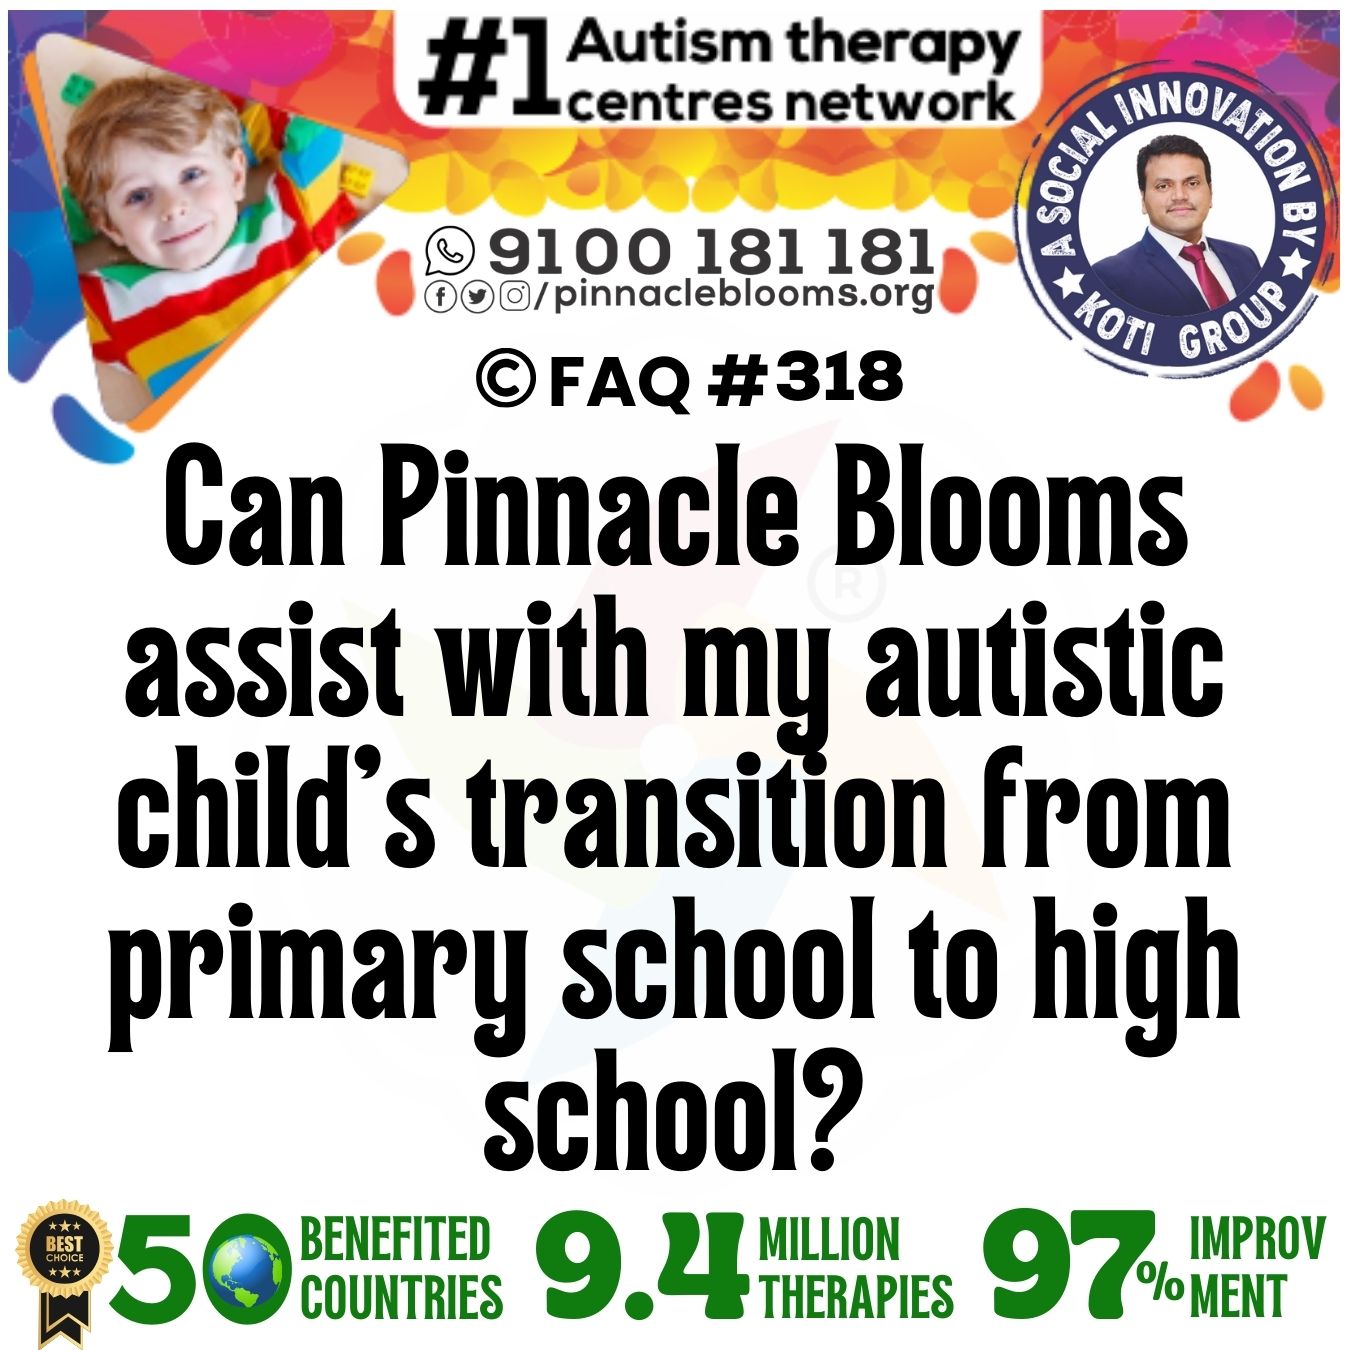 Can Pinnacle Blooms assist with my autistic child's transition from primary school to high school?